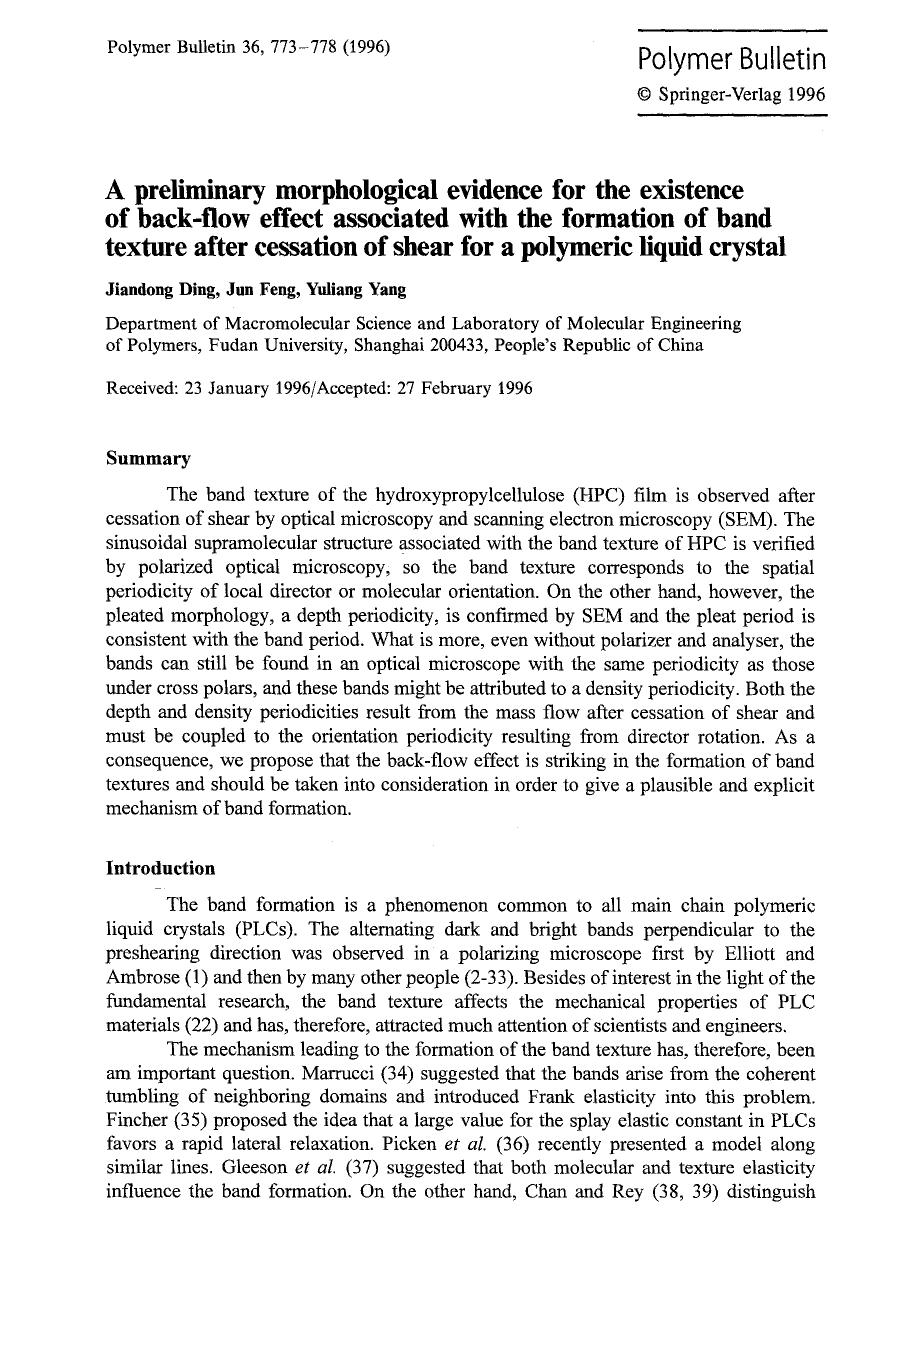 A preliminary morphological evidence for the existence of back-flow effect associated with the formation of band texture after cessation of shear for a polymeric liquid crystal by Unknown